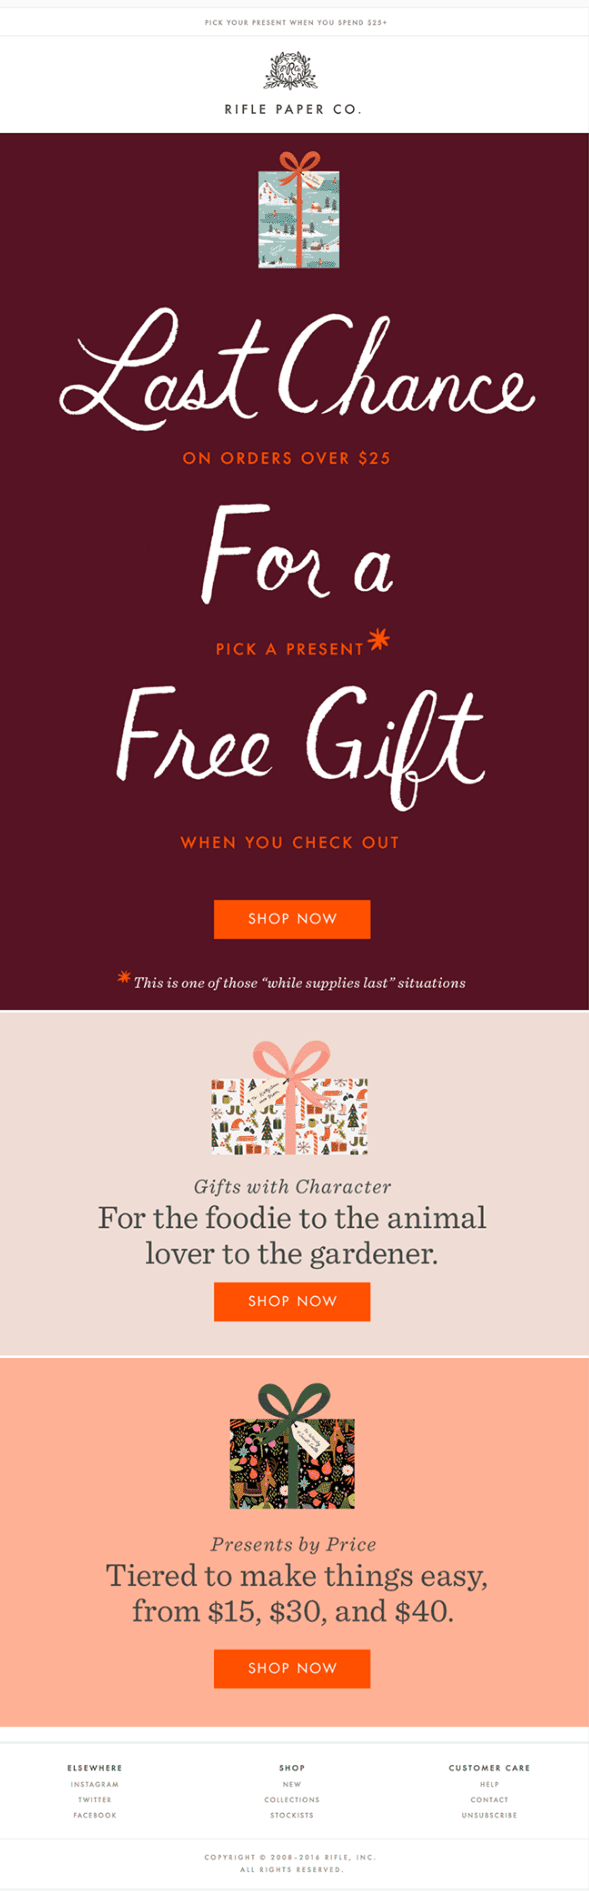 Holiday email for business by Rifle Paper co offering a free gift. The email is red with presents on it and white cursive writing that says "Last chance for a free gift". 